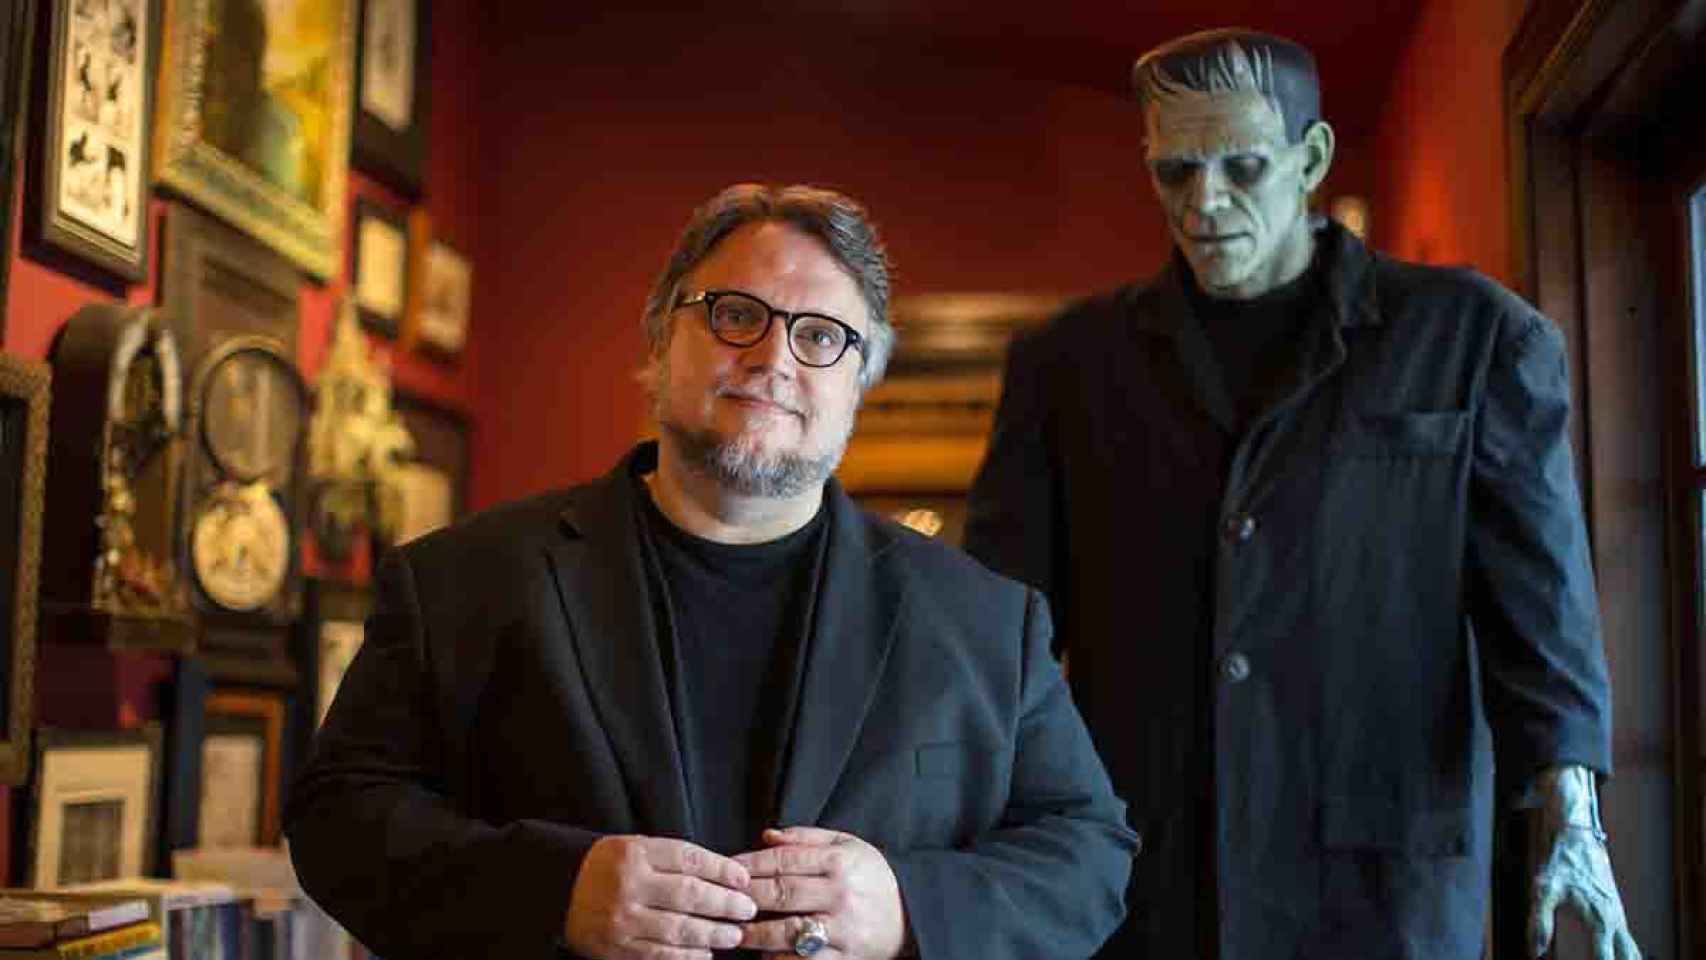 Netflix won't stop making movies, but it will be blockbusters like Guillermo del Toro's Frankenstein